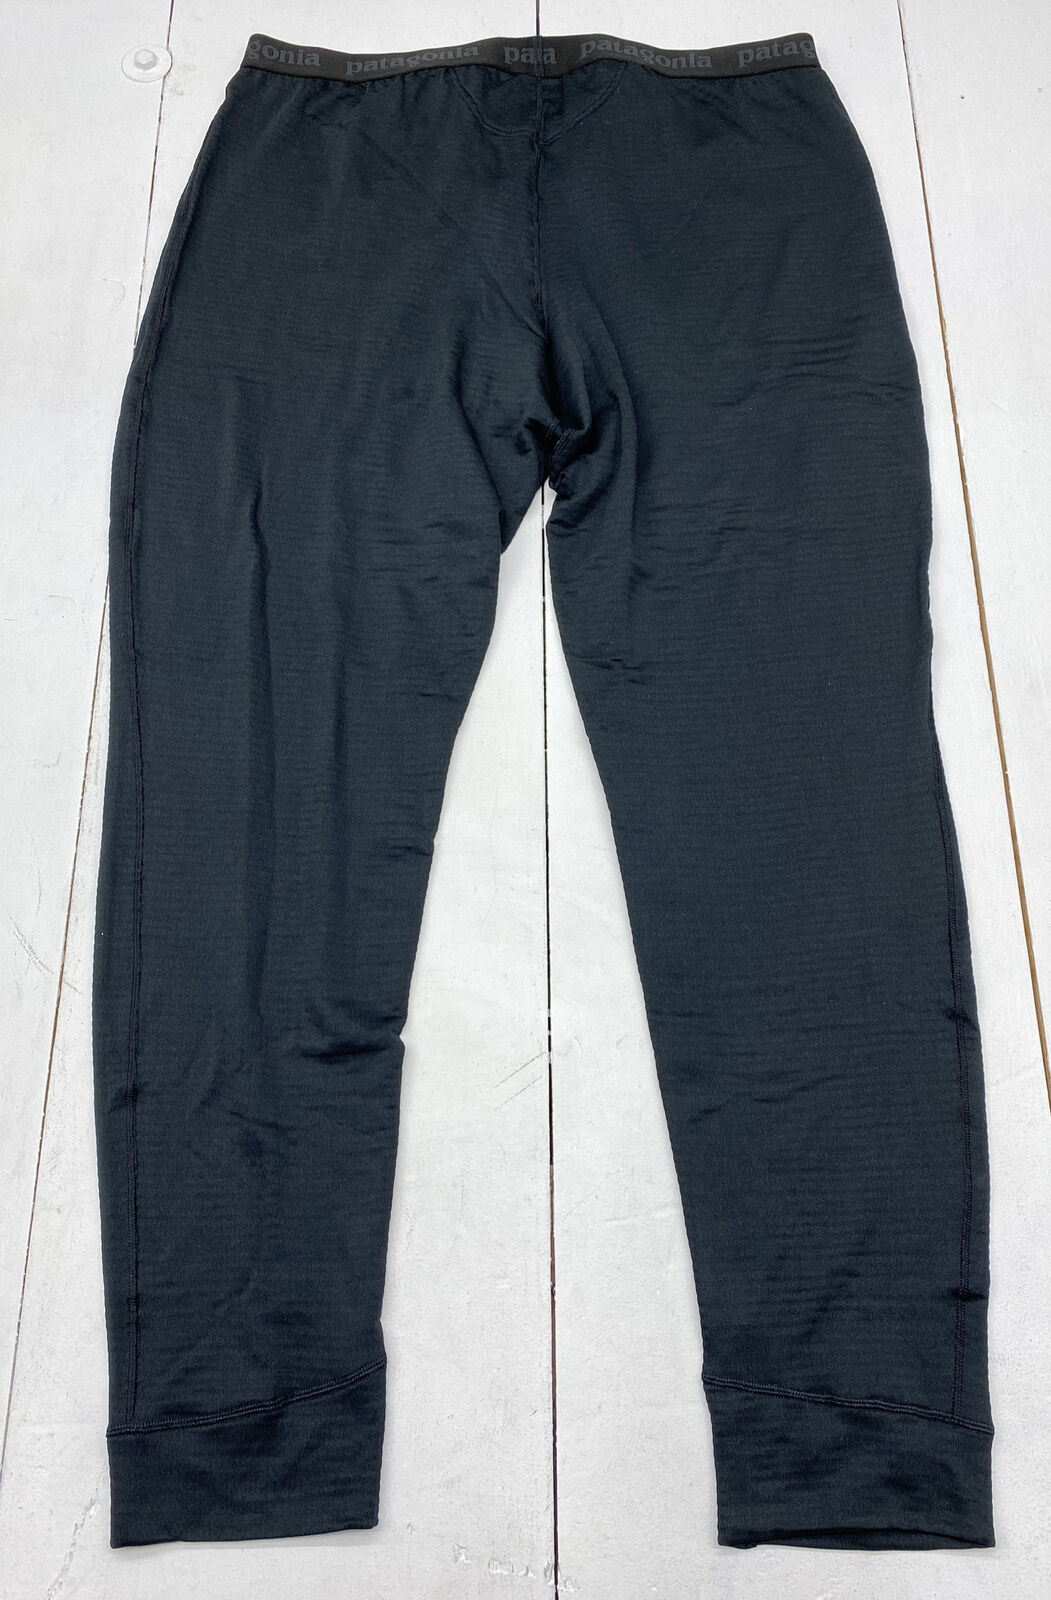 Patagonia: Women's Capilene® Thermal Weight Bottoms - Black Size